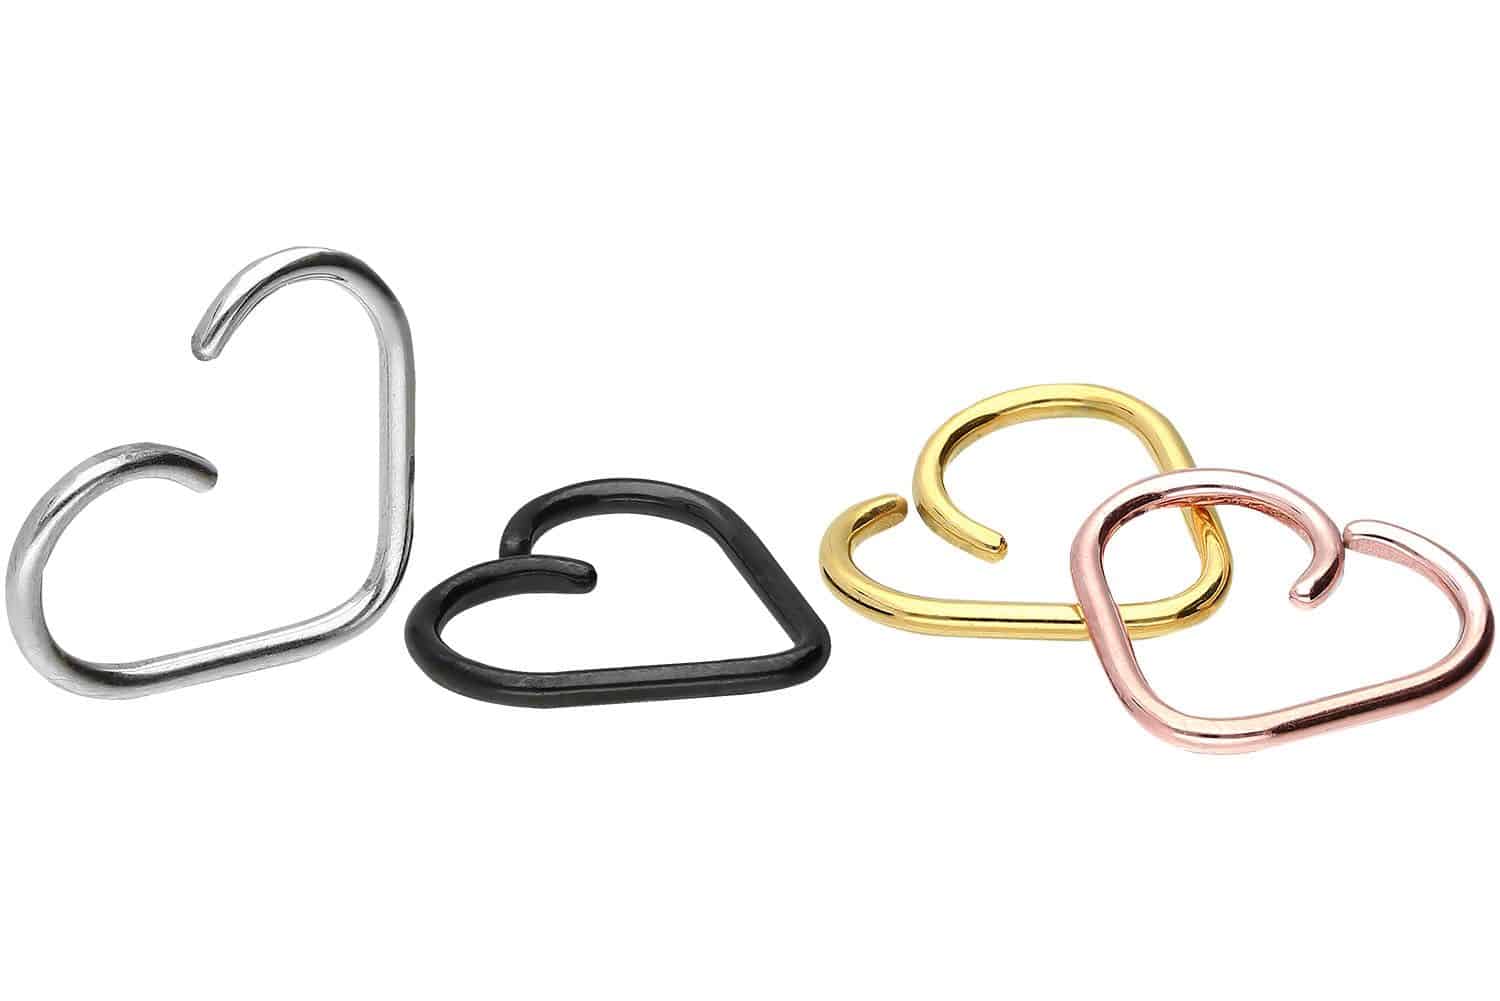 Surgical steel fake ring HEART - bendable ++SALE++